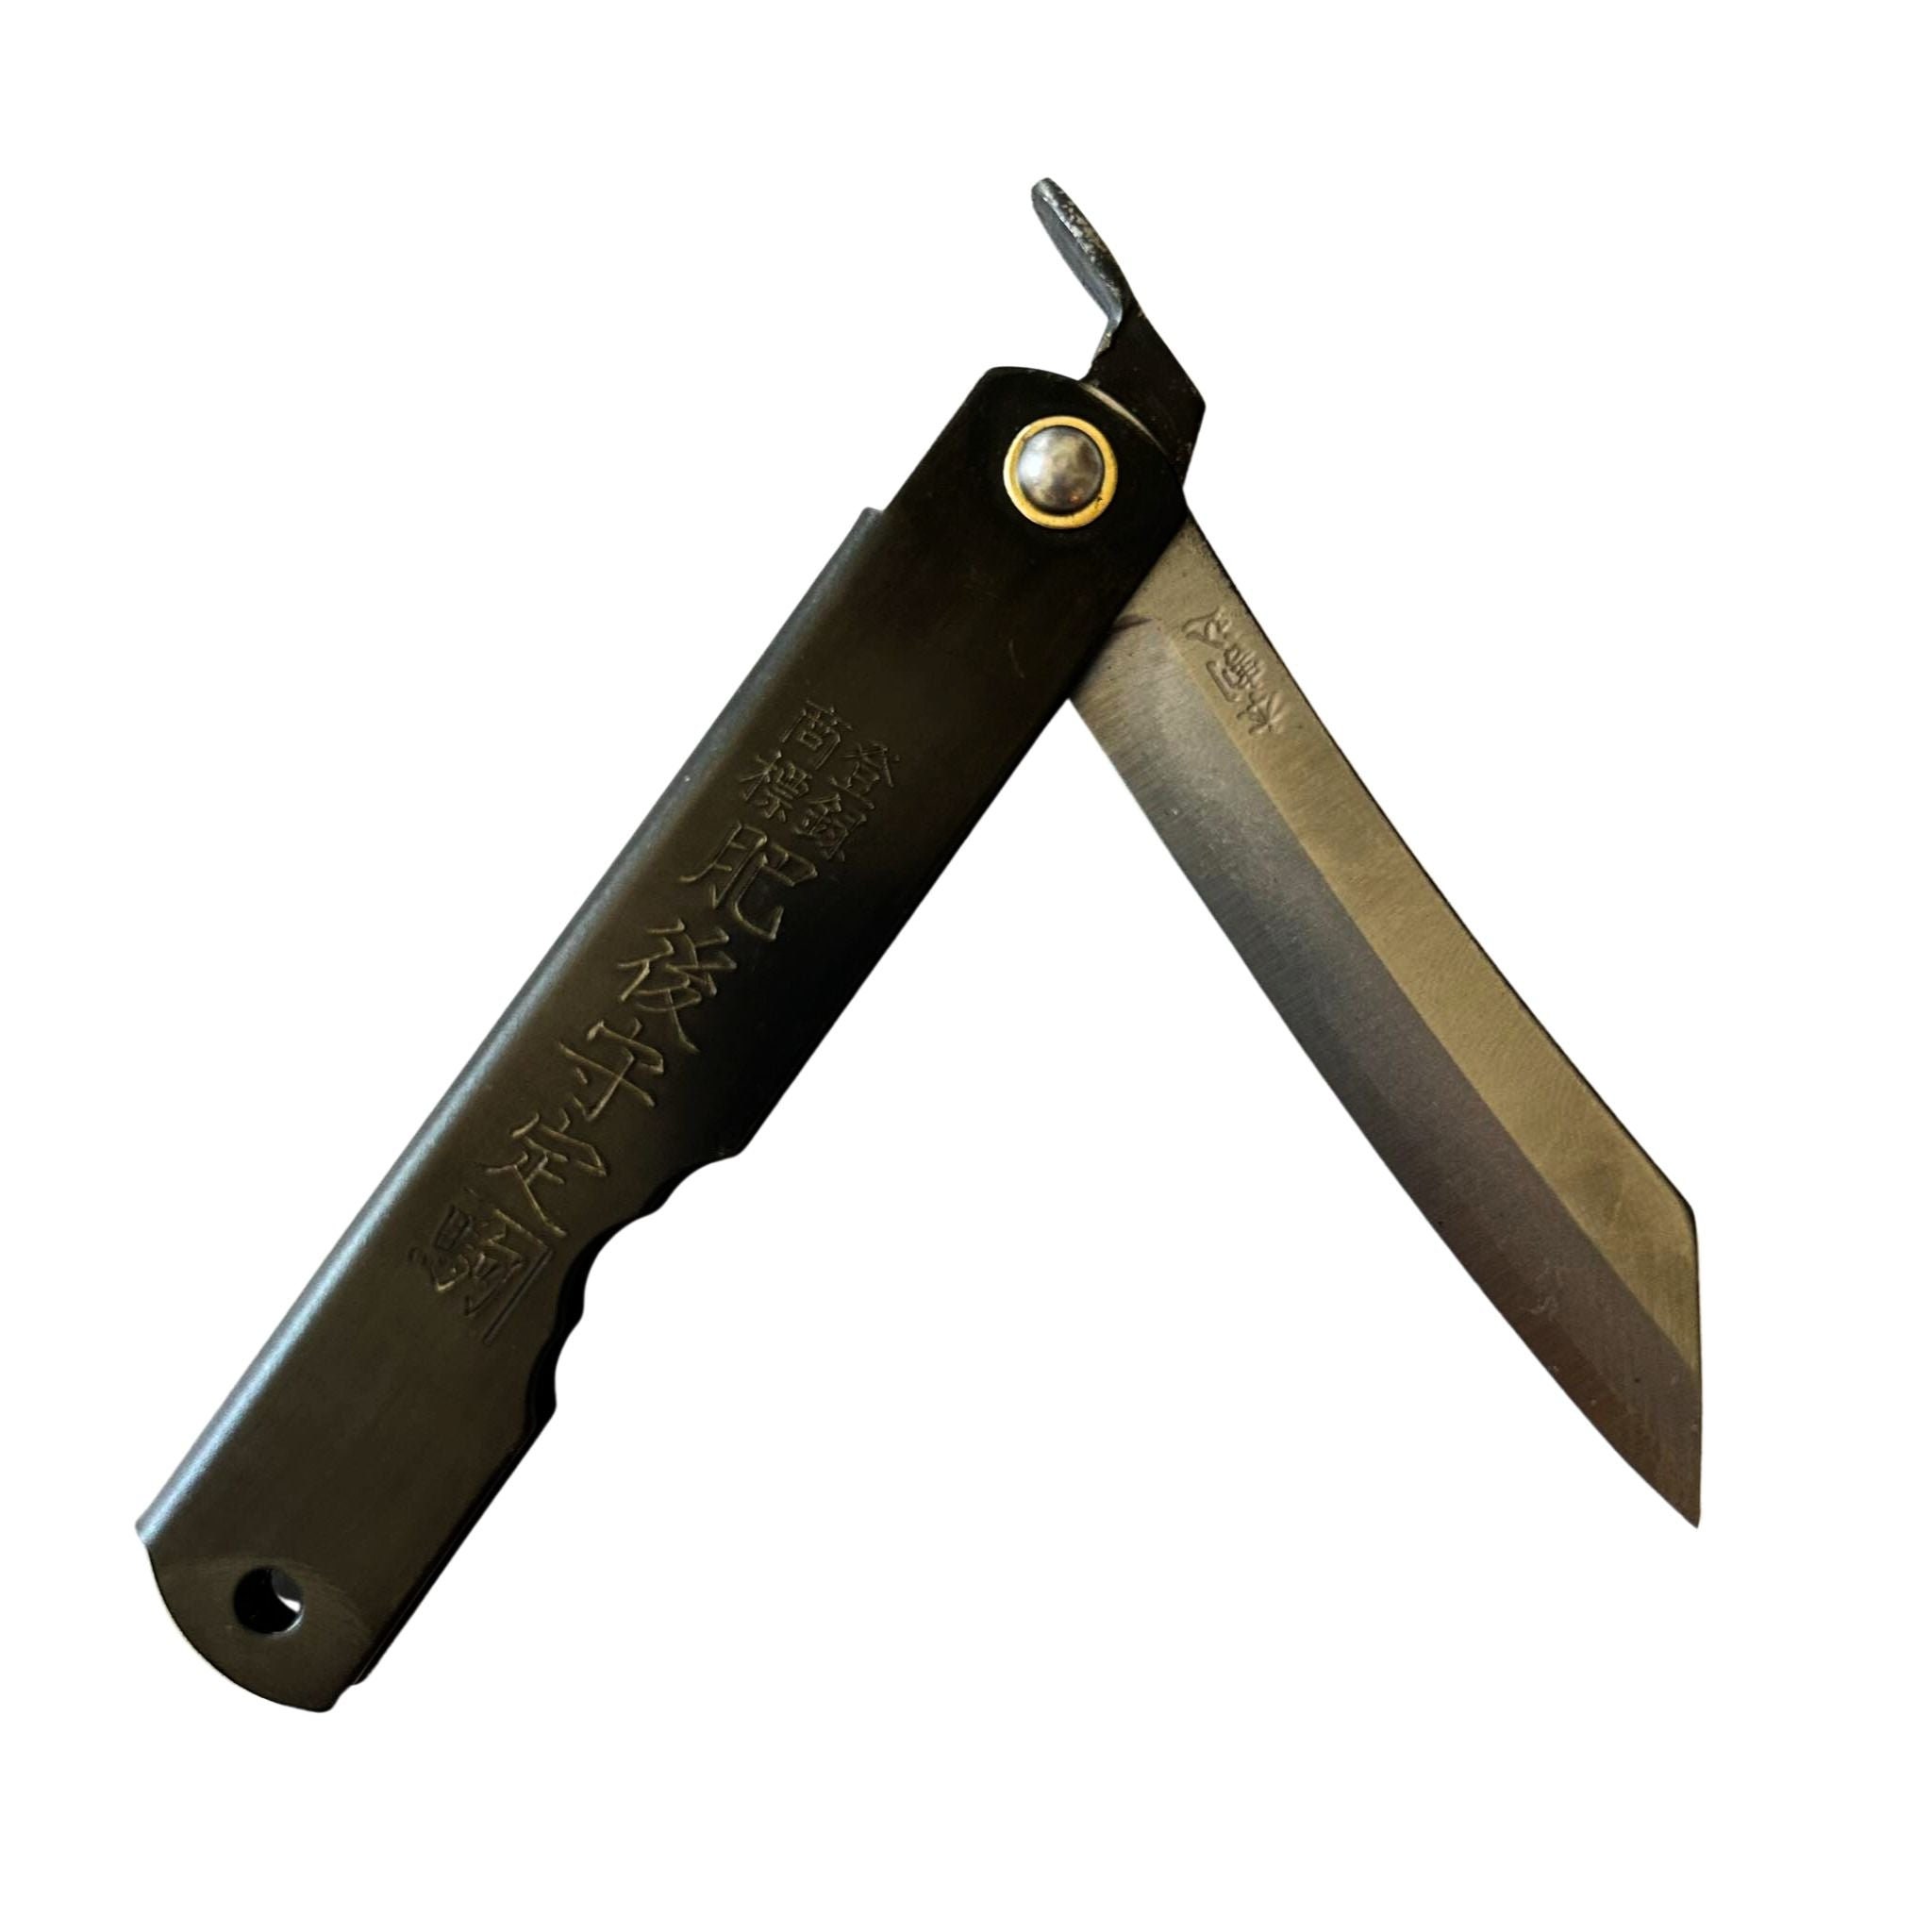 Professional Knife and Scissor Sharpening Service - Free Shipping both Ways!